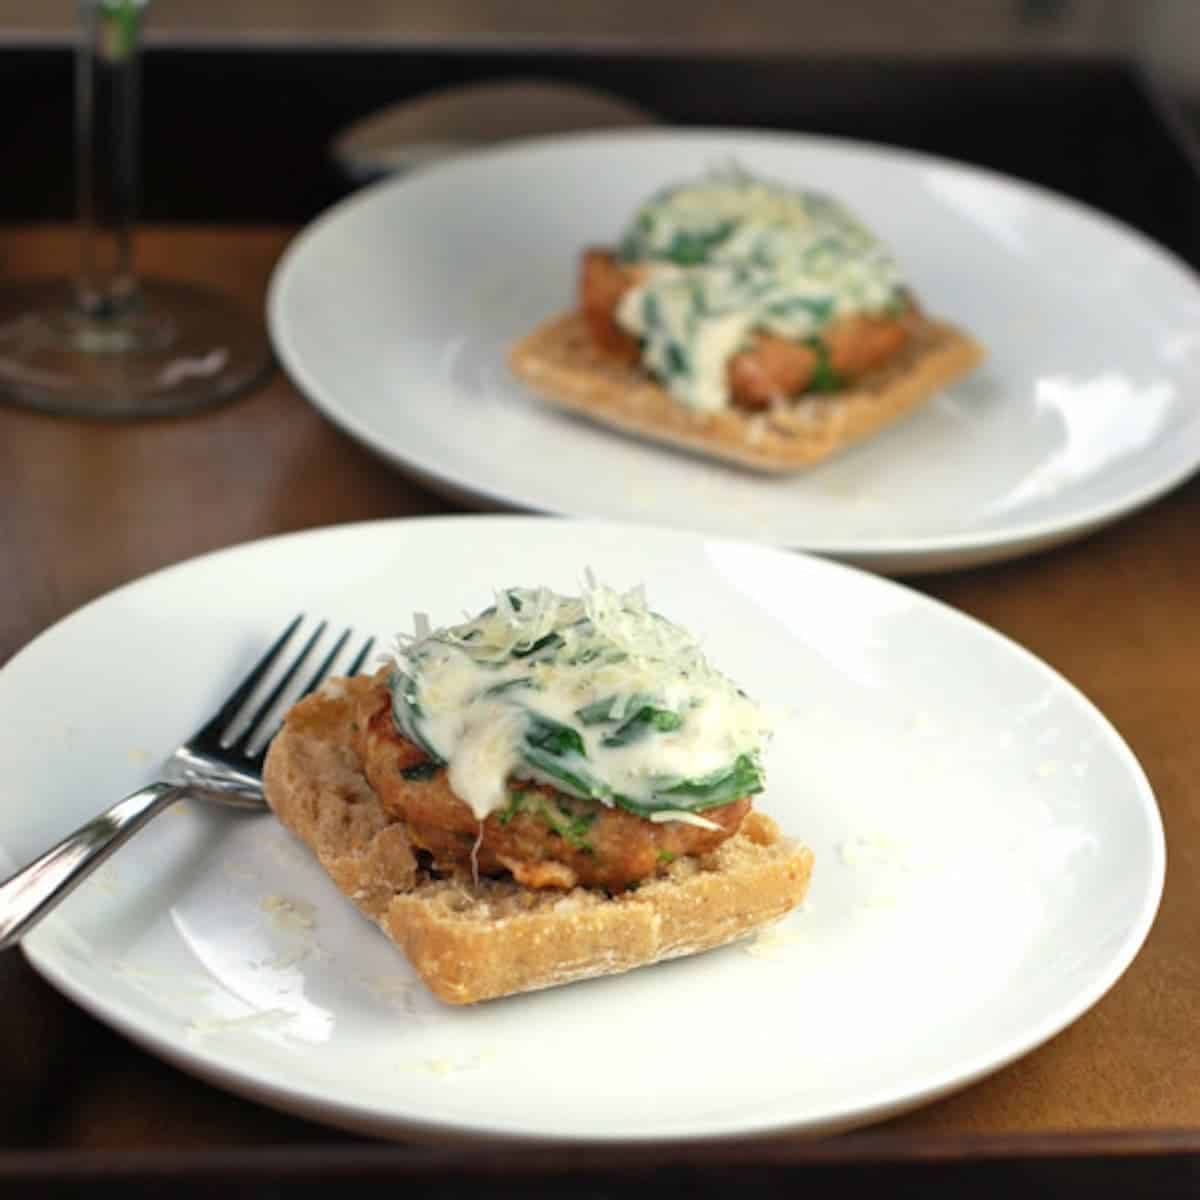 Garlic Parmesan Burgers with Creamed Spinach Sauce on white plates with a fork.